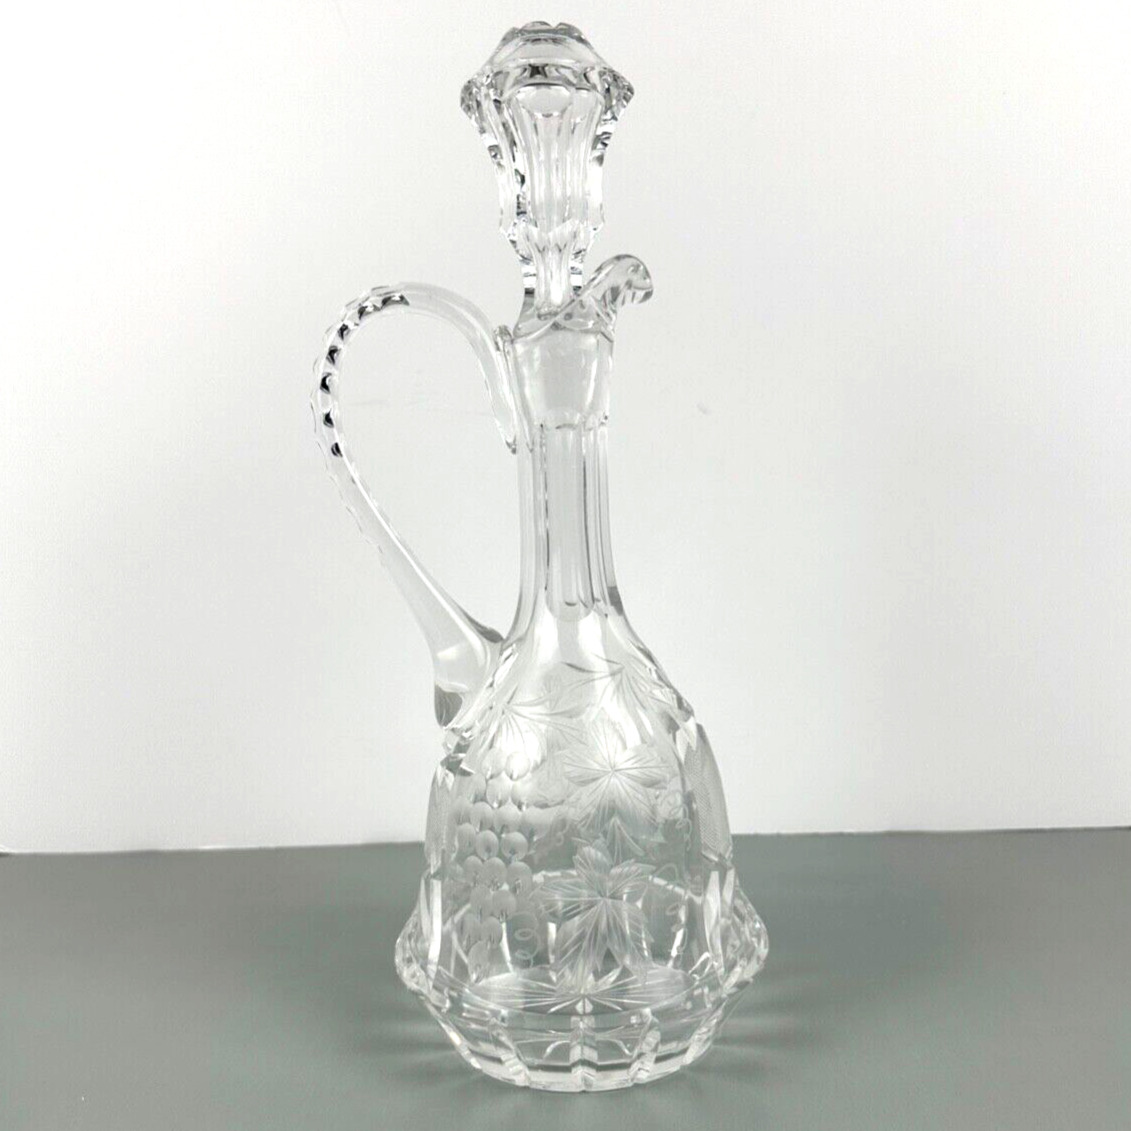 Etched Grapevine Design Crystal Cut Decanter with Stopper and Sturdy Handle